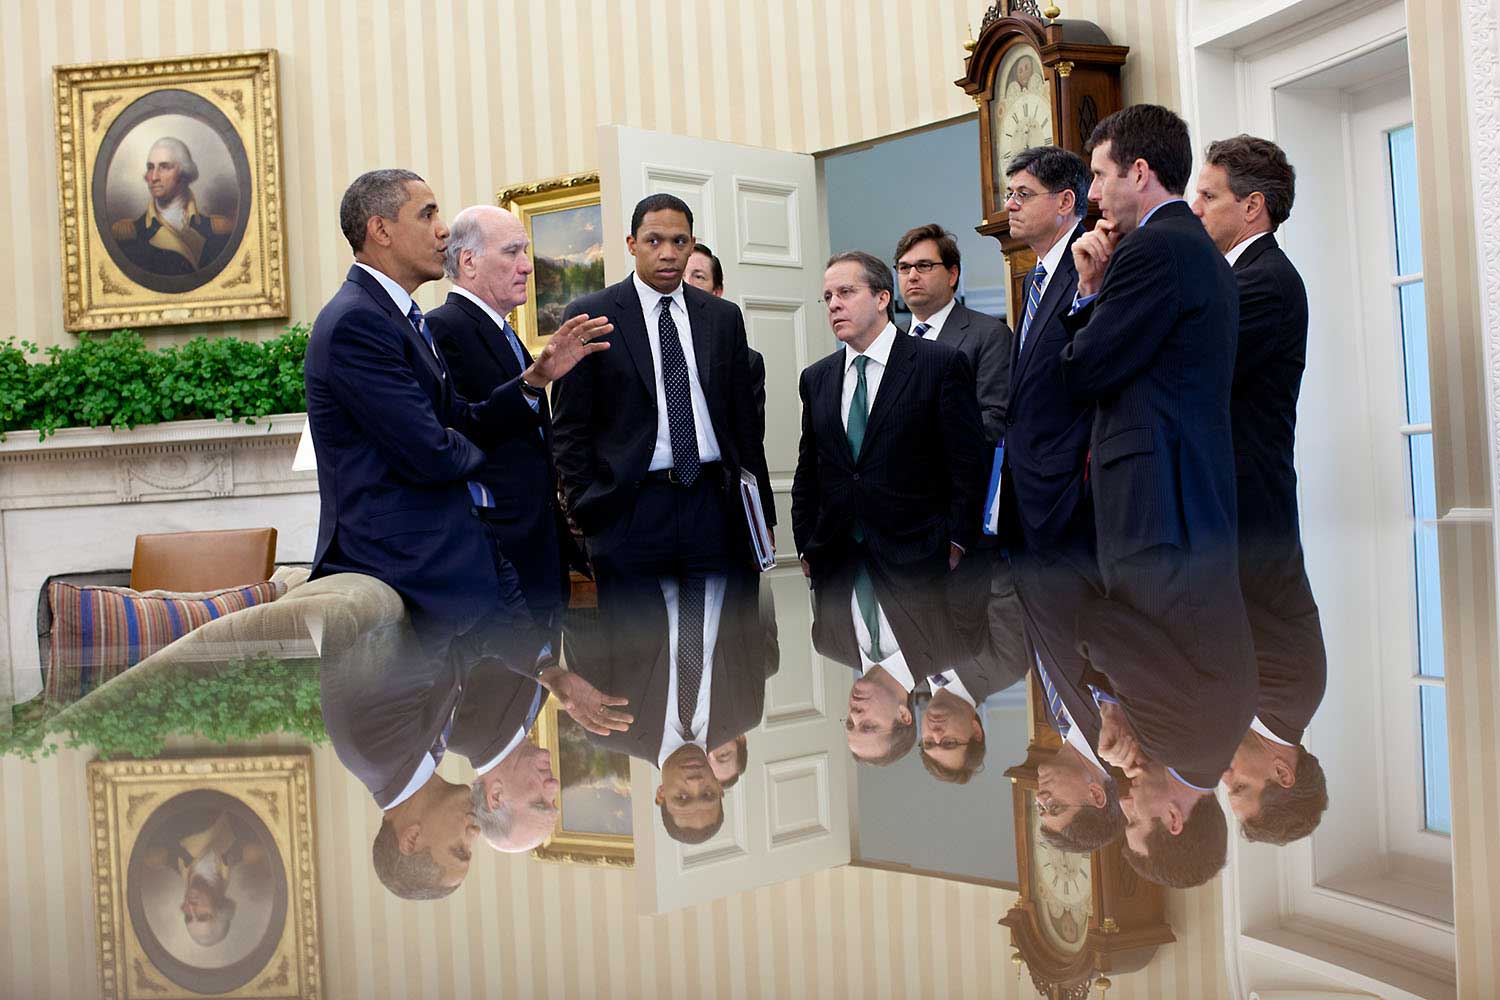 "The reflection in this photo (since so many people ask me) was taken with my camera just above a small glass-topped table in the Oval Office as the President talked with members of his staff following a meeting with the Congressional leadership, July 7, 2011."